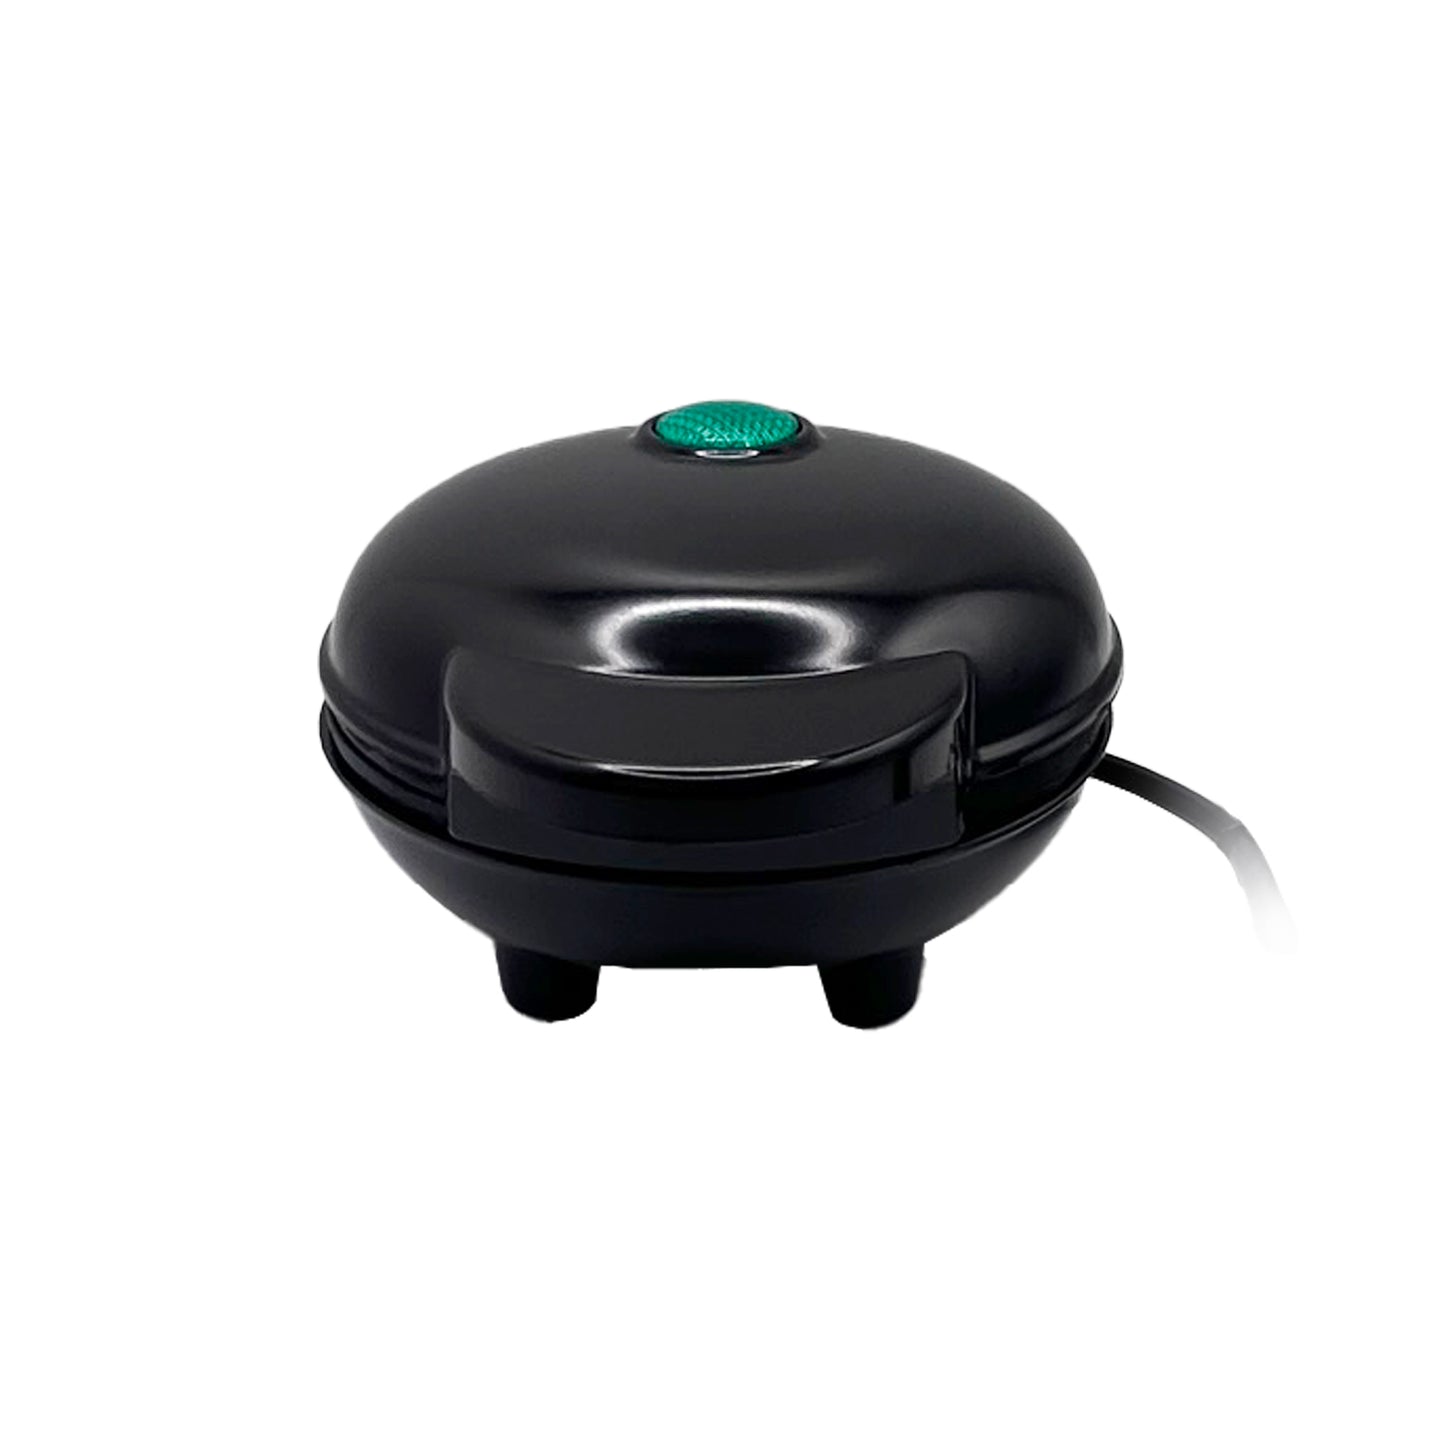 a black waffle iron with a green button